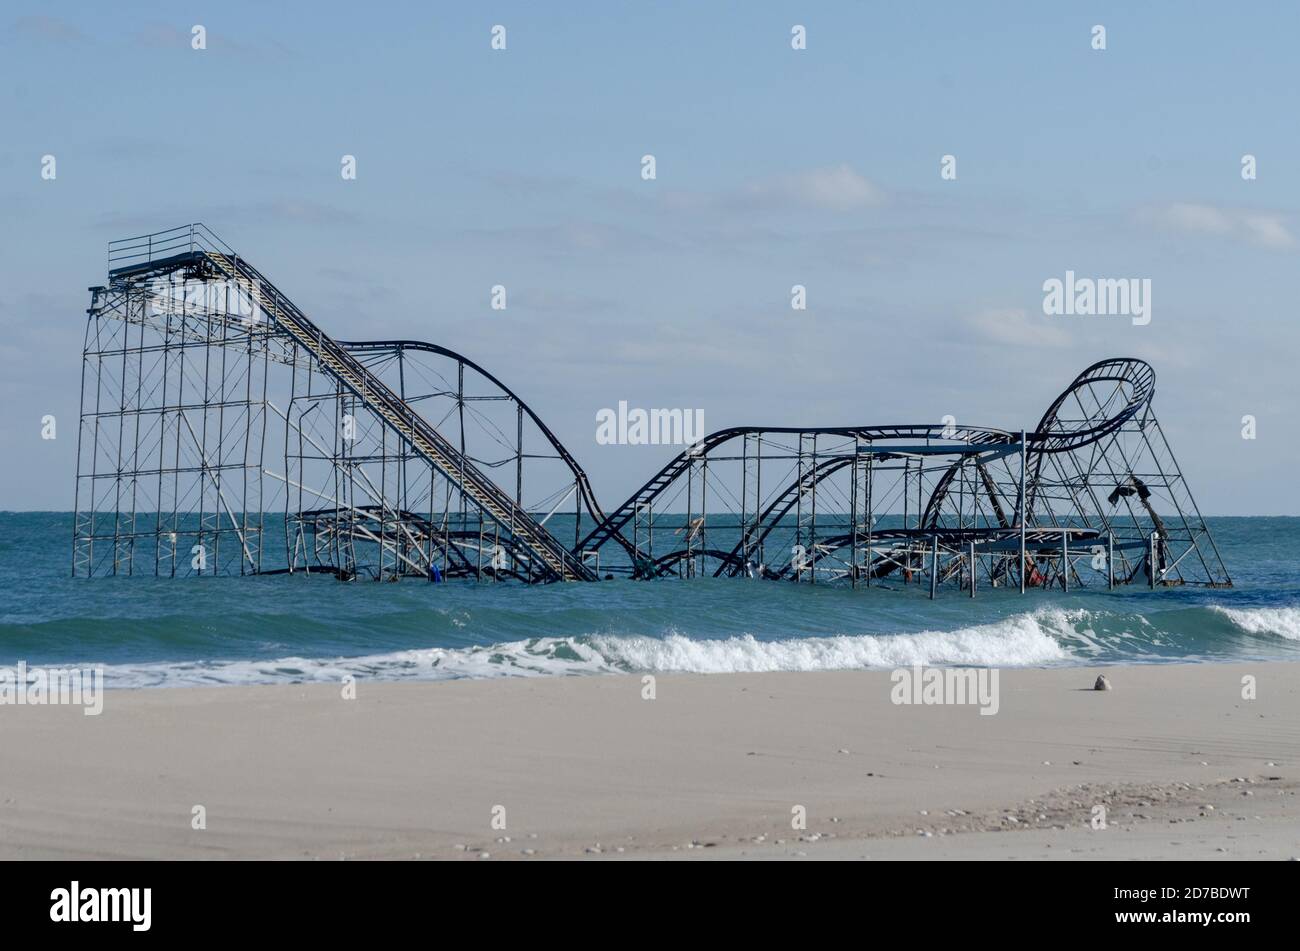 A roller coaster sits in the Atlantic Ocean after a pier collapsed following Hurricane Sandy. Sandy hit on October 29, 2012. Photo by Liz Roll Stock Photo